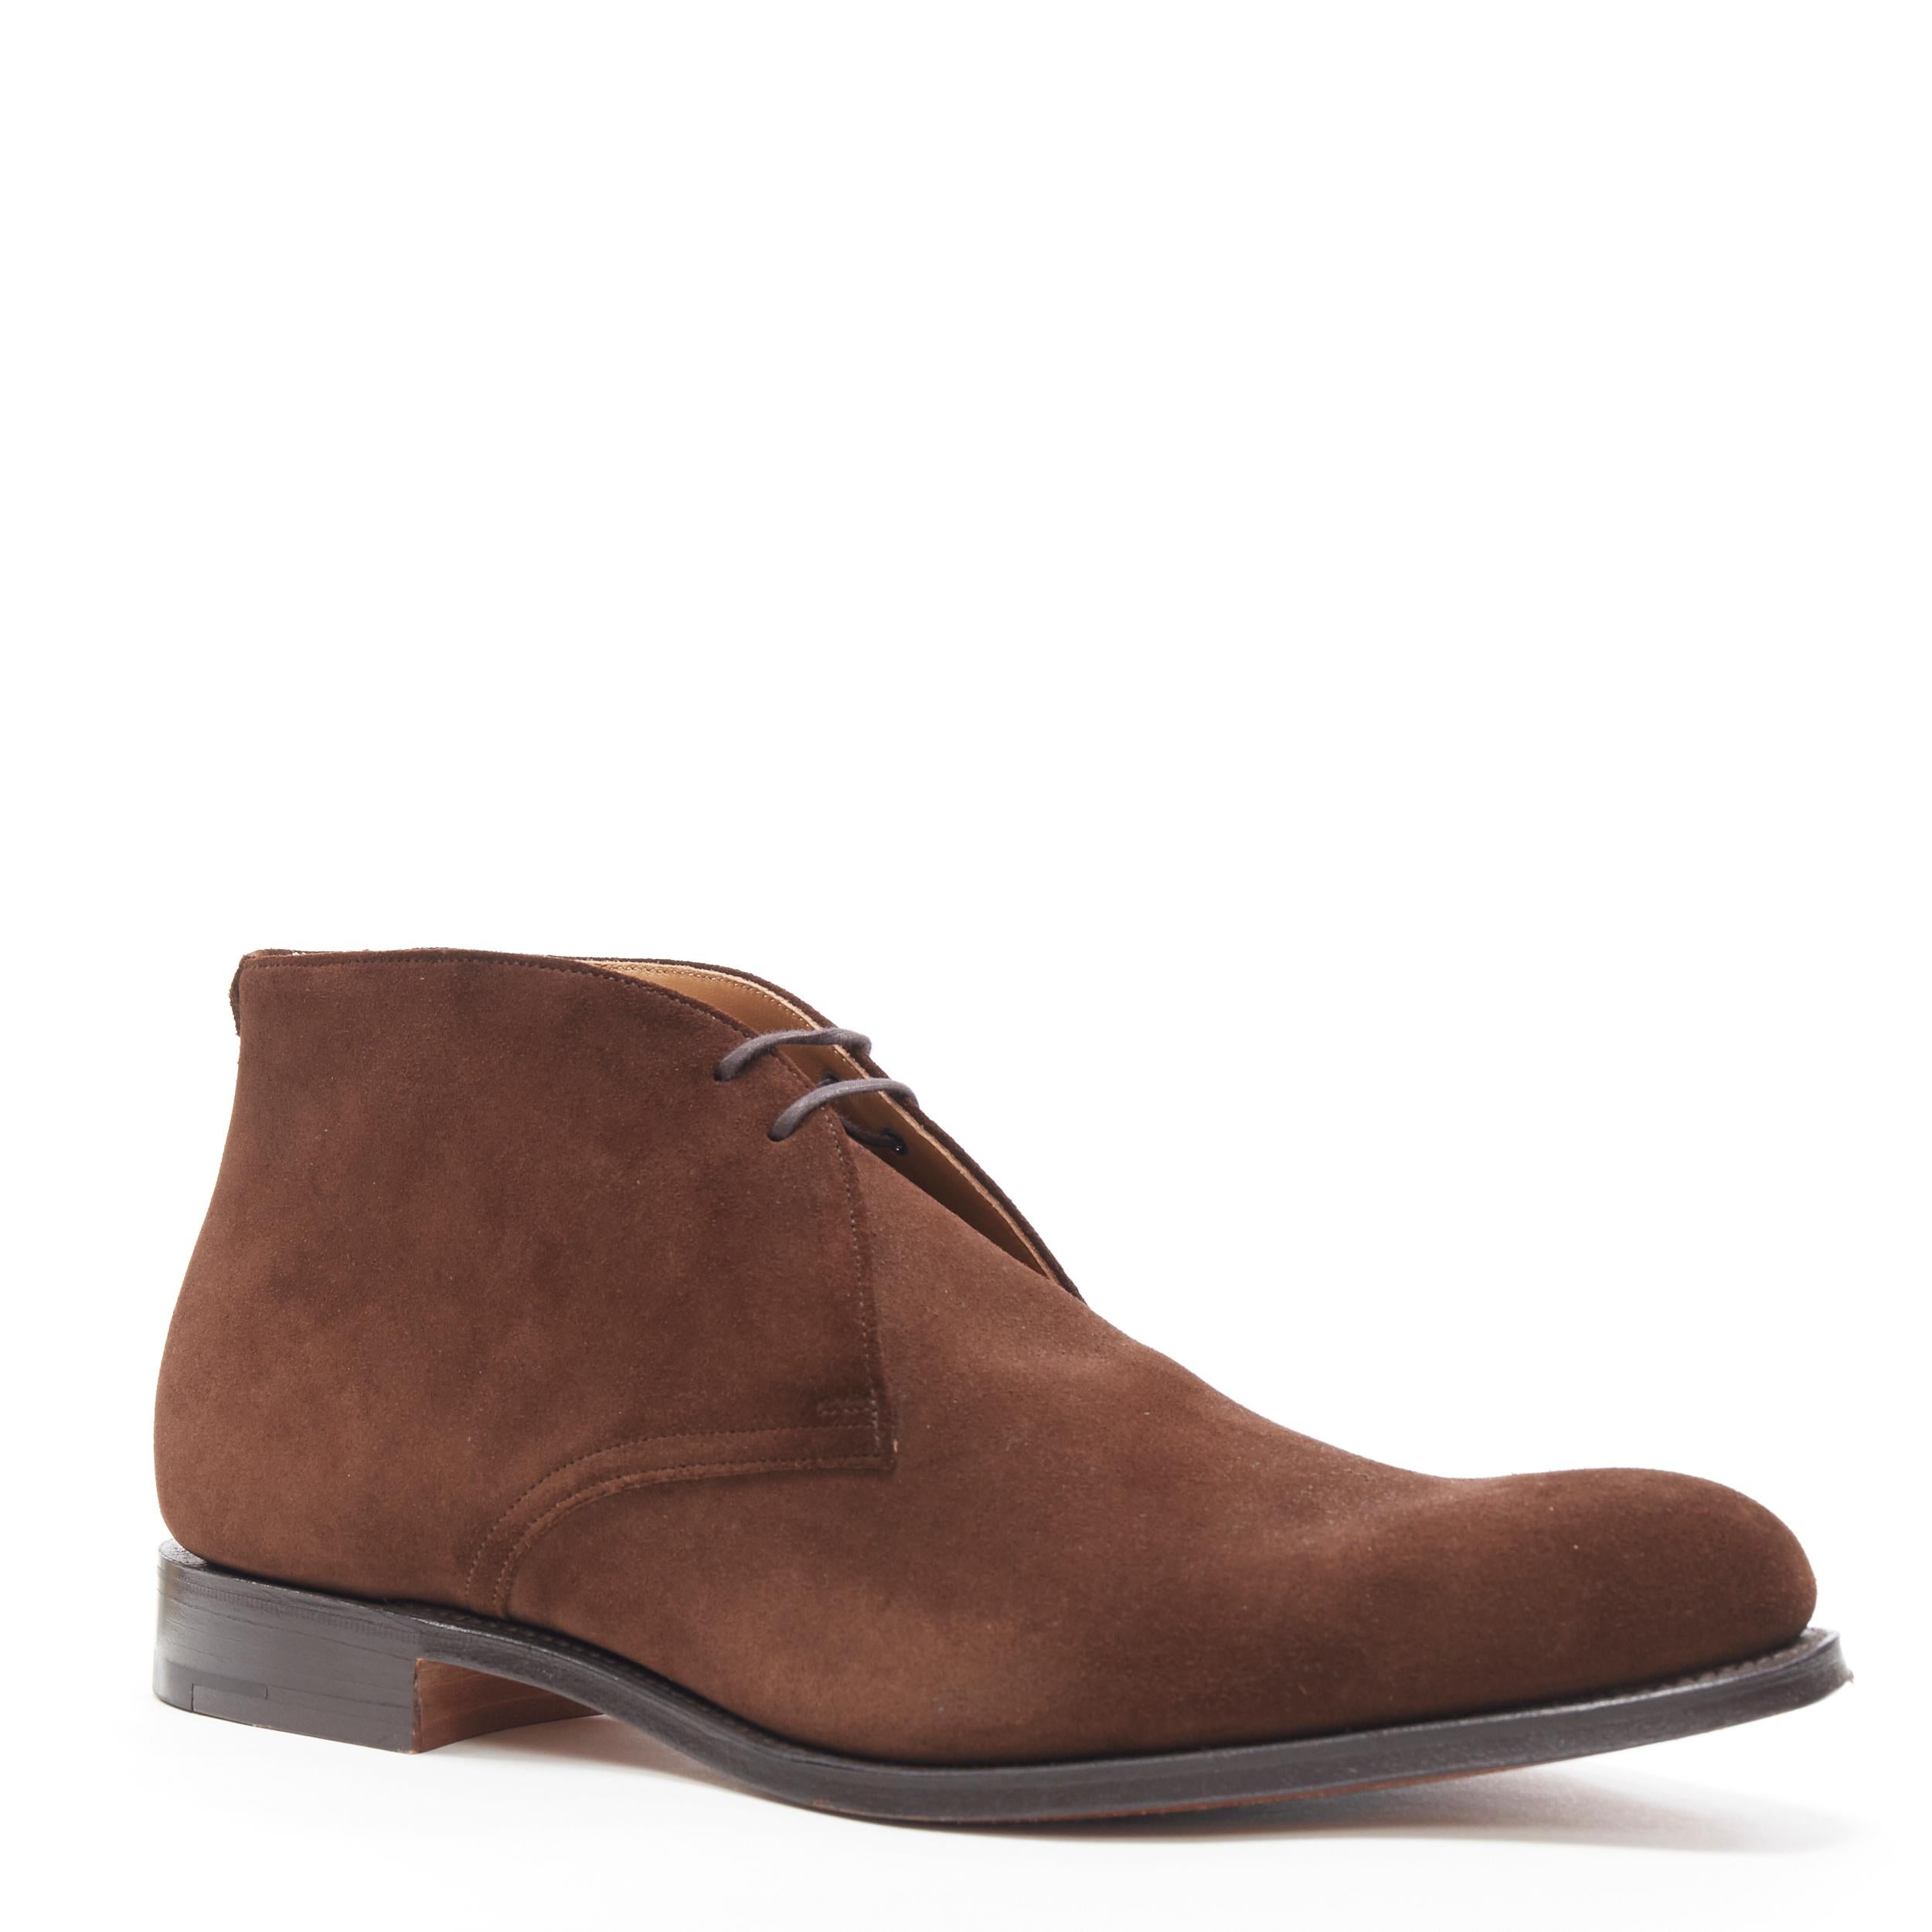 new CHURCH'S Rickford Superbuck brown suede chukka desert boots UK10.5 EU44.5
Brand: Churchs
Model Name / Style: Rickford
Material: Suede
Color: Burgundy
Pattern: Solid
Closure: Lace up
Extra Detail: Superbuck brown suede leather upper. Tonal